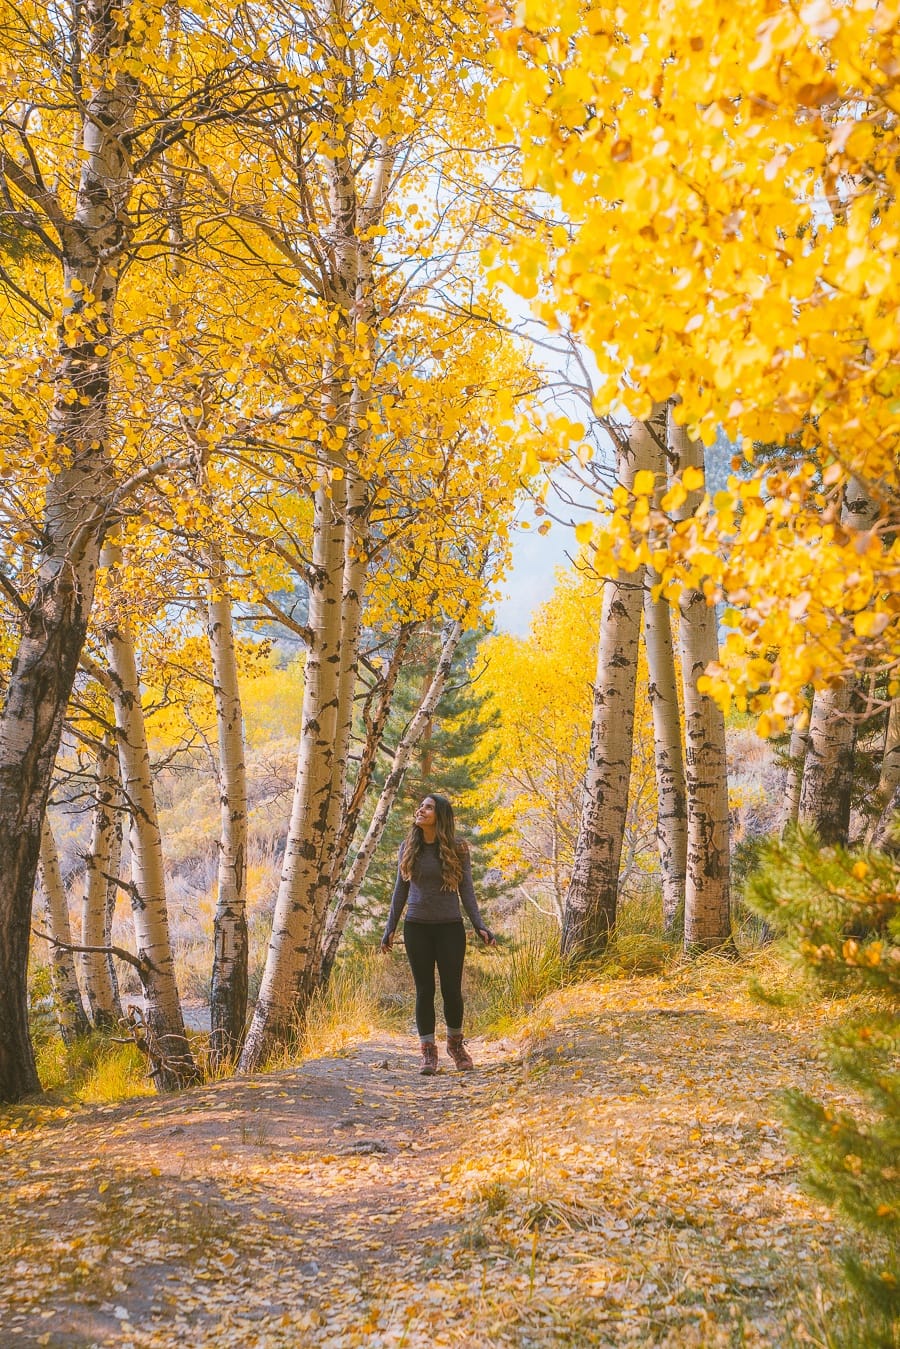 How We Dress for Fall Outdoor Hiking - Explore More Clean Less